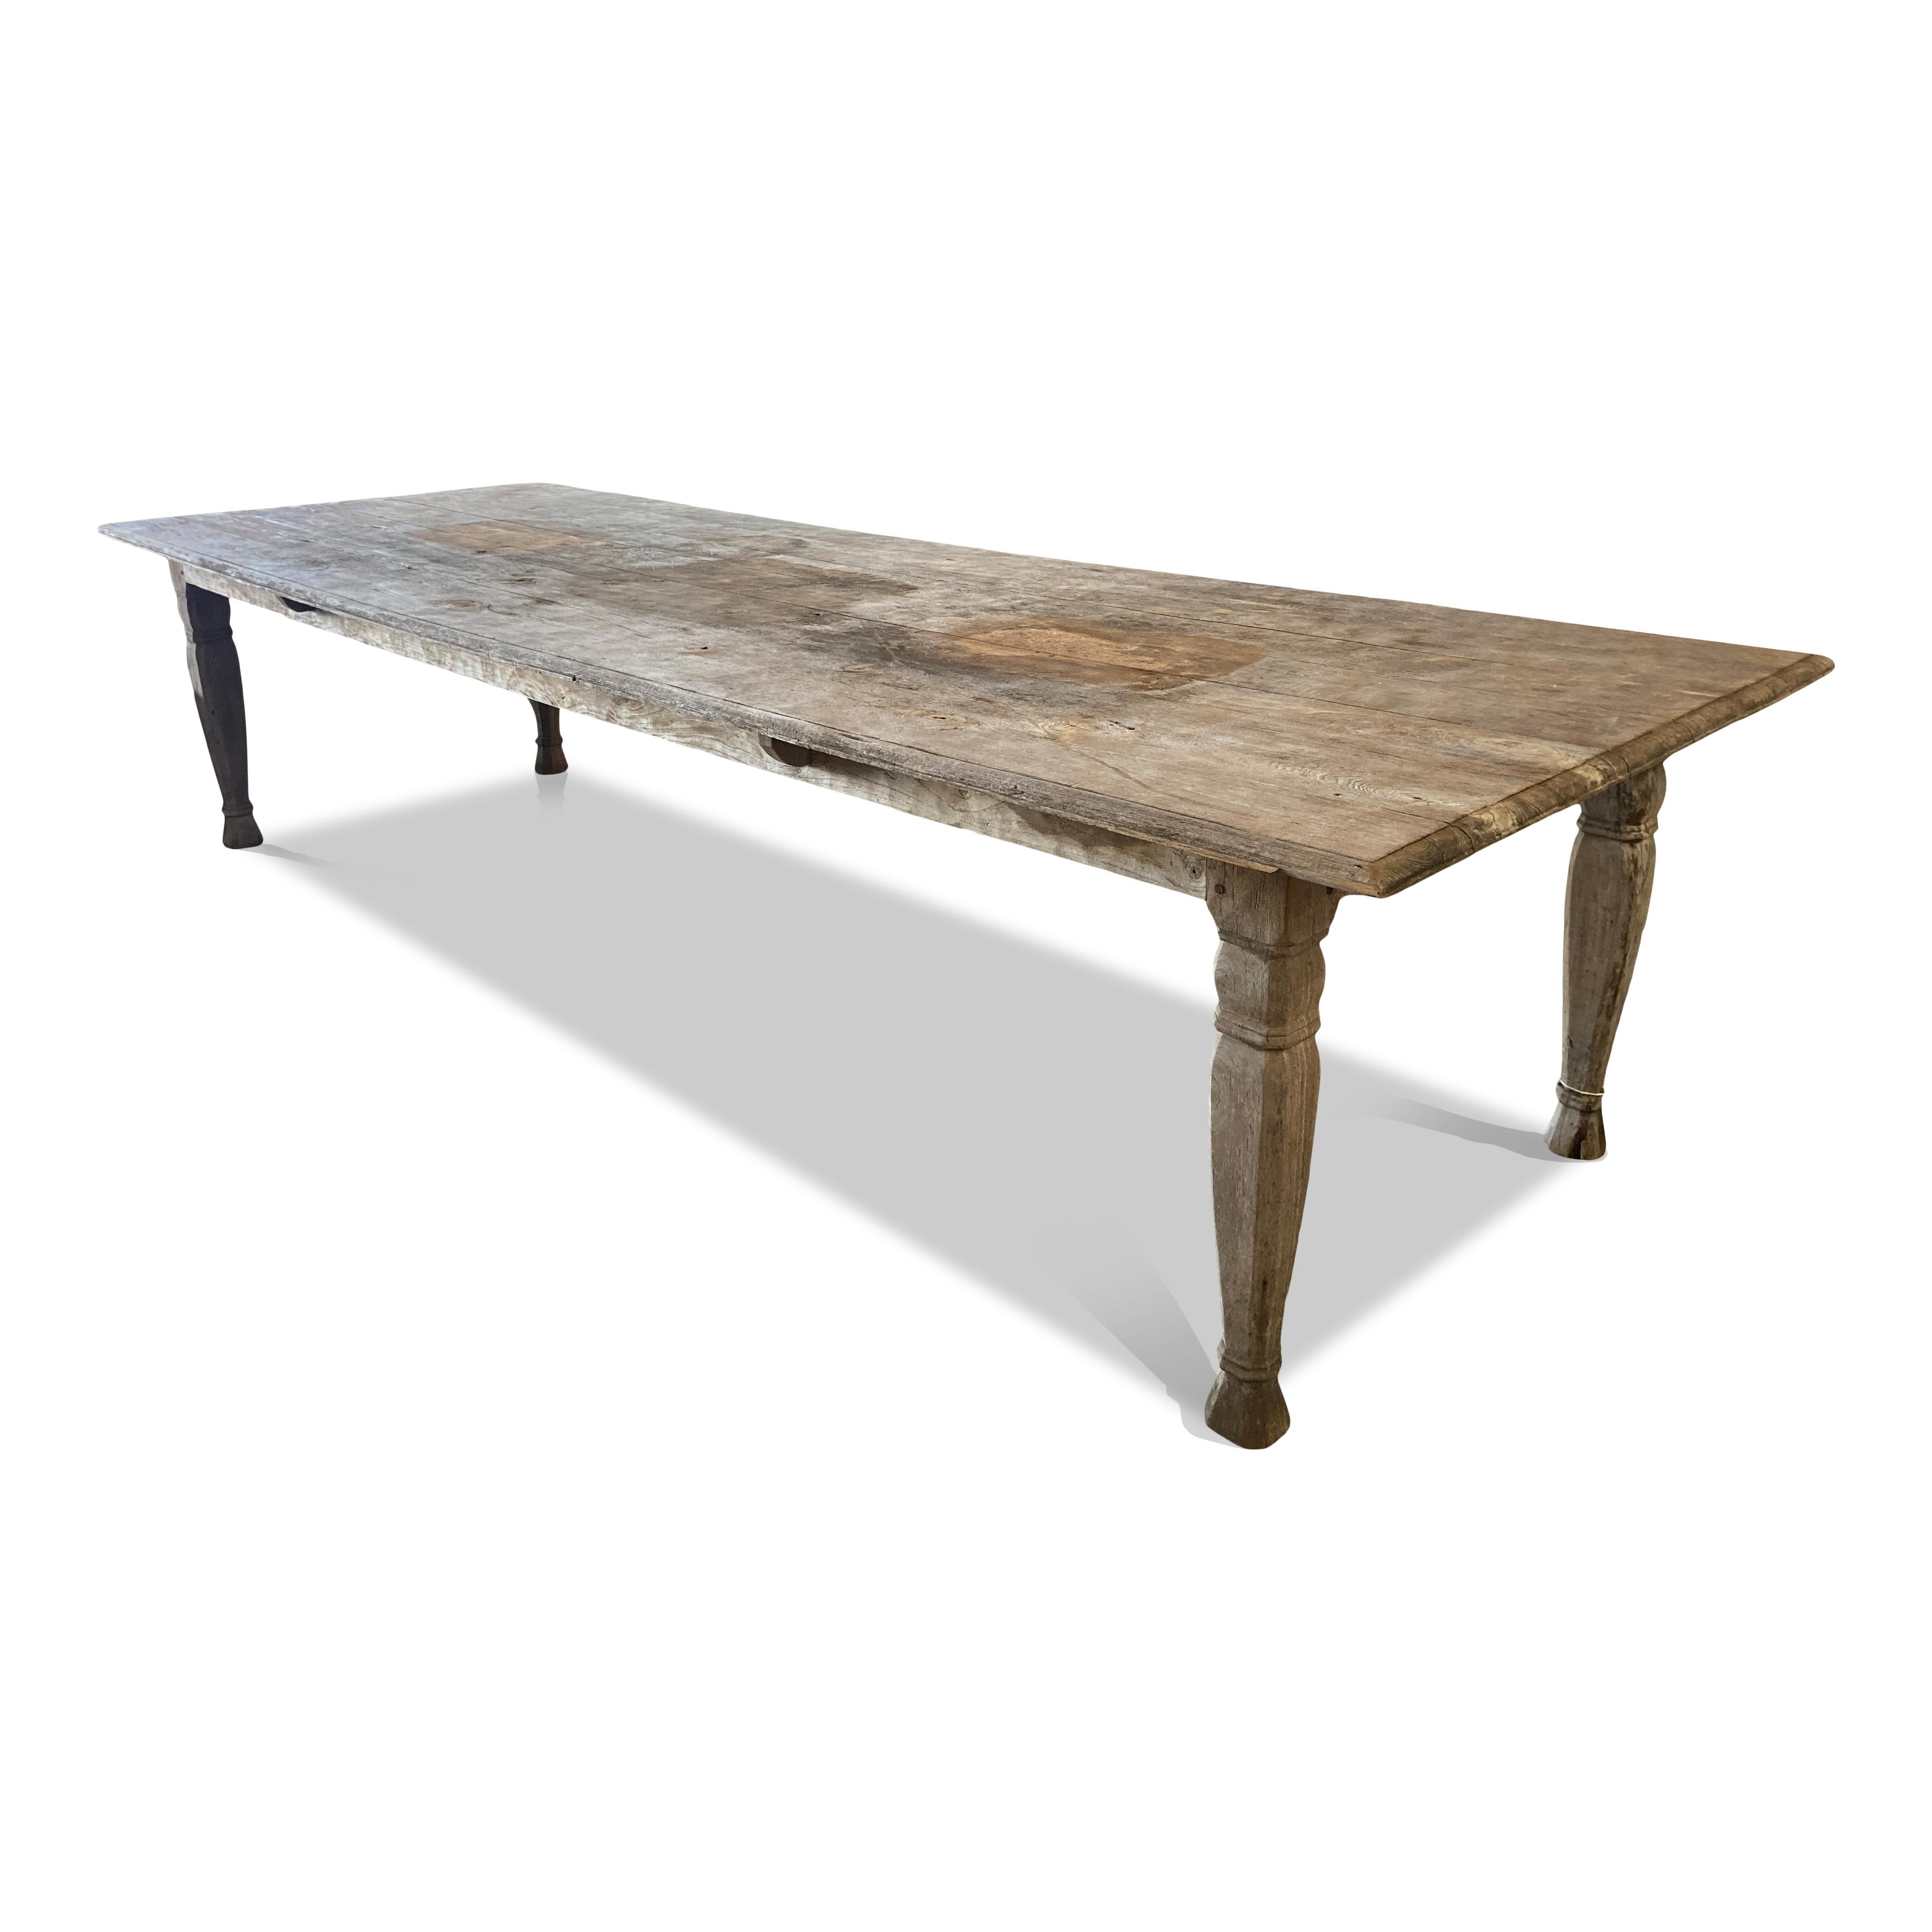 This Large Vintage Oak Farmhouse Table is a timeless classic, perfect for adding a touch of rustic elegance to your interior. Crafted from solid oak, it is both spacious and durable, providing a stylish yet functional piece that will stand the test